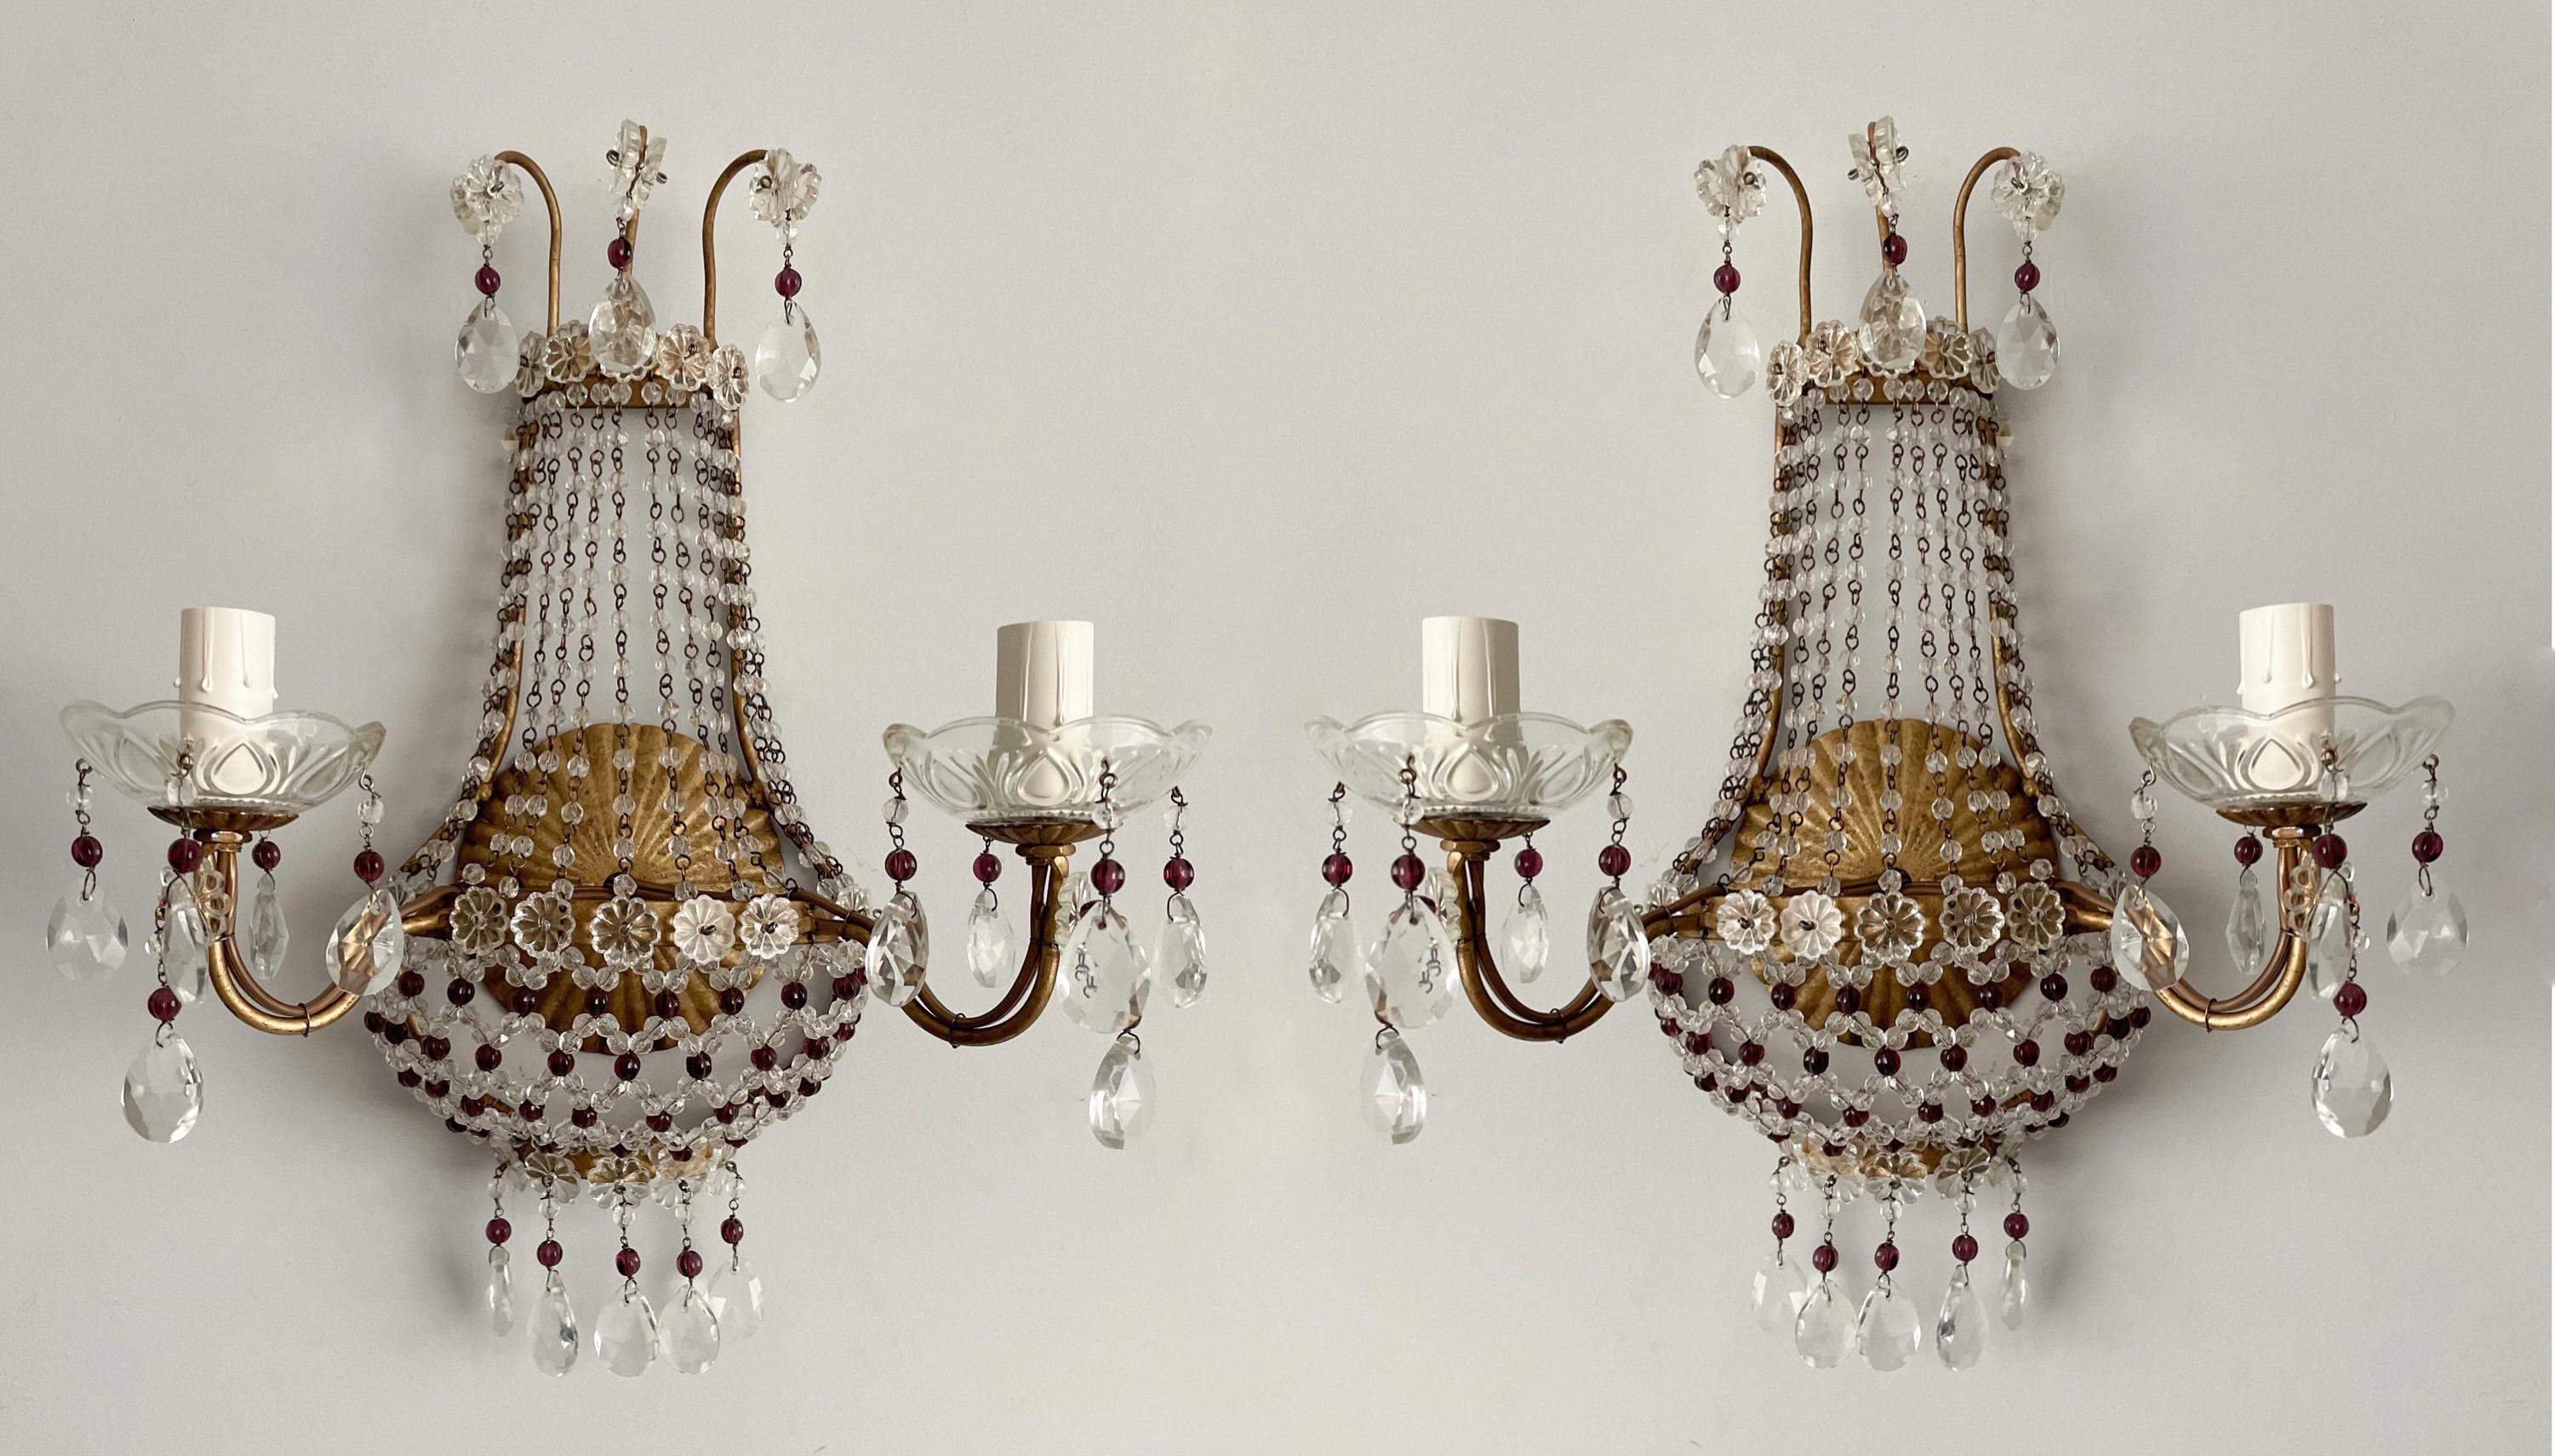 Exquisite, pair of Italian vintage crystal beaded sconces. 

Each sconce consists of a gilded-iron frame decorated with clear and amethyst glass beading. 

The sconces are wired and working condition, each requires 2 candelabra bulbs. 

This